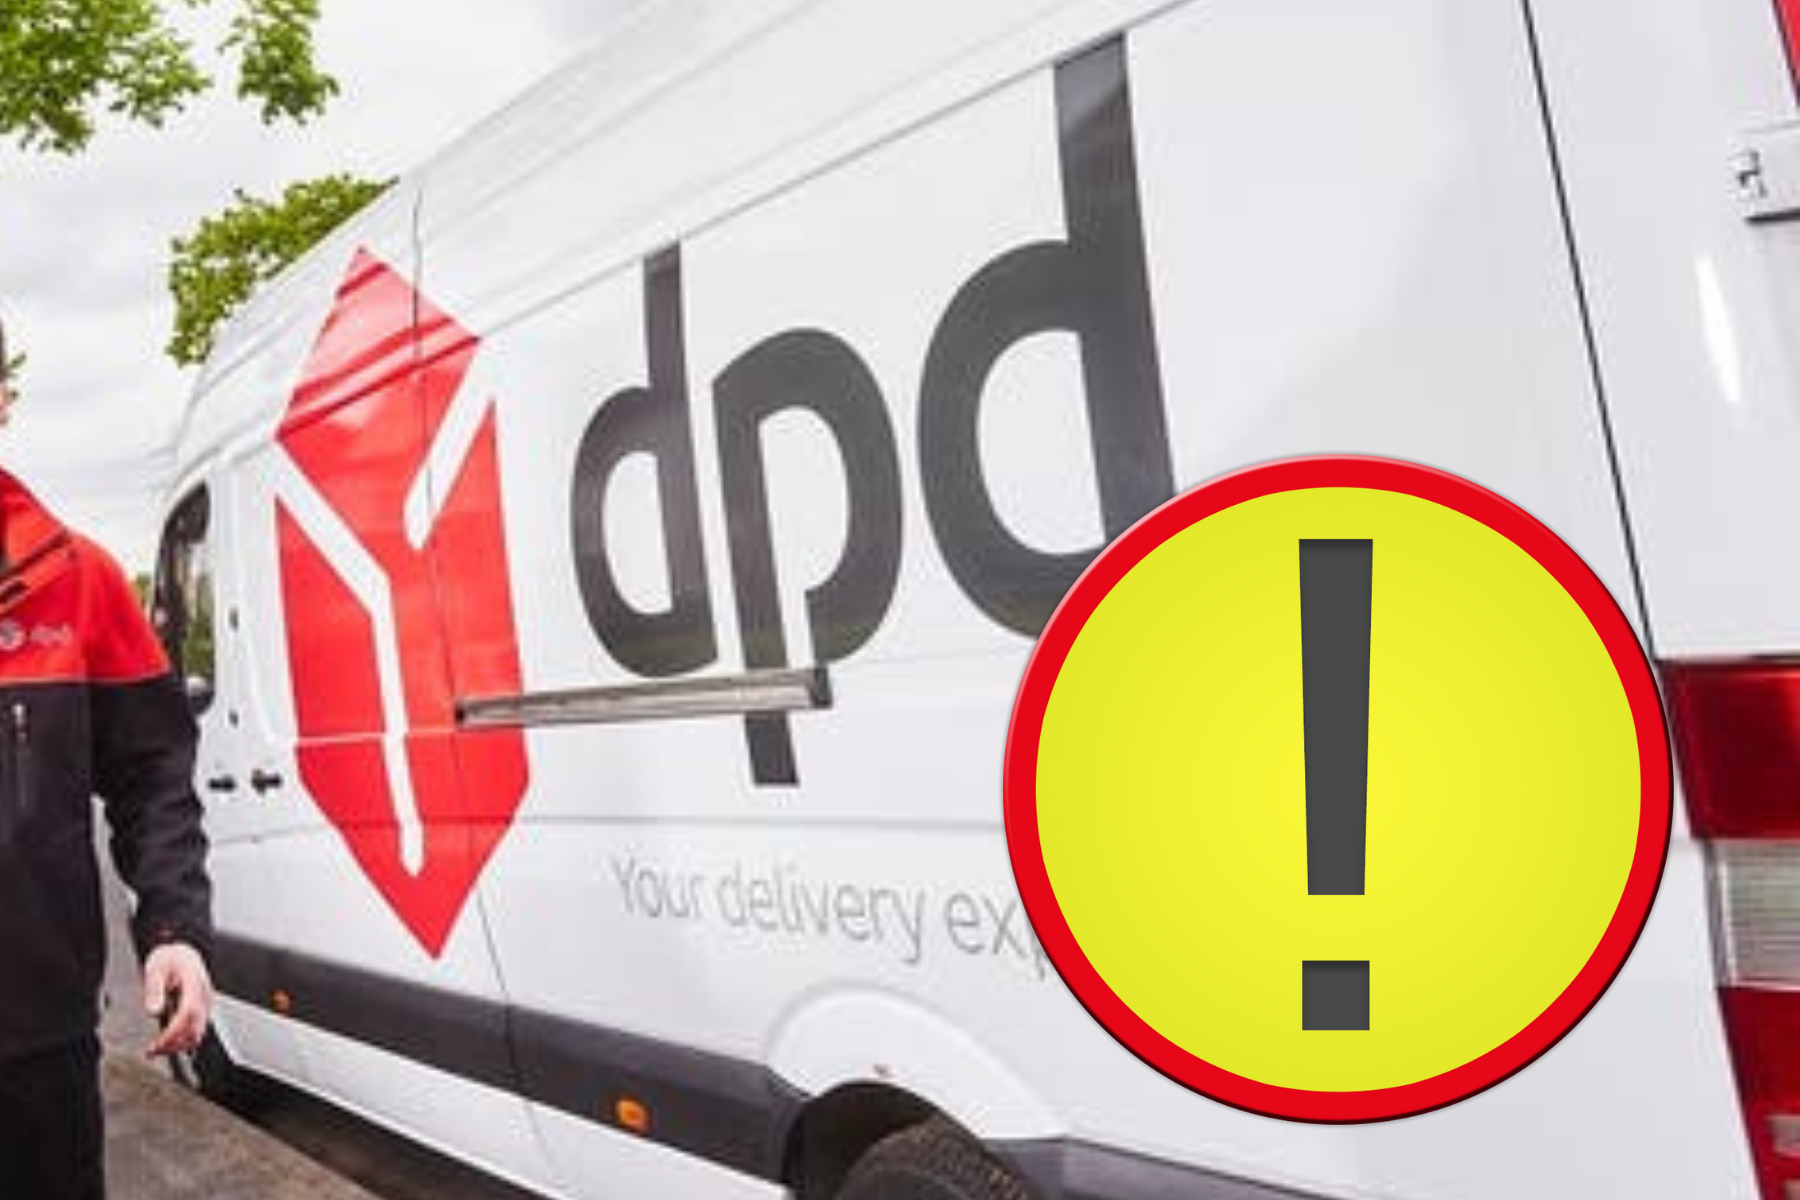 Urgent warning over DPD scam targeting people across the UK